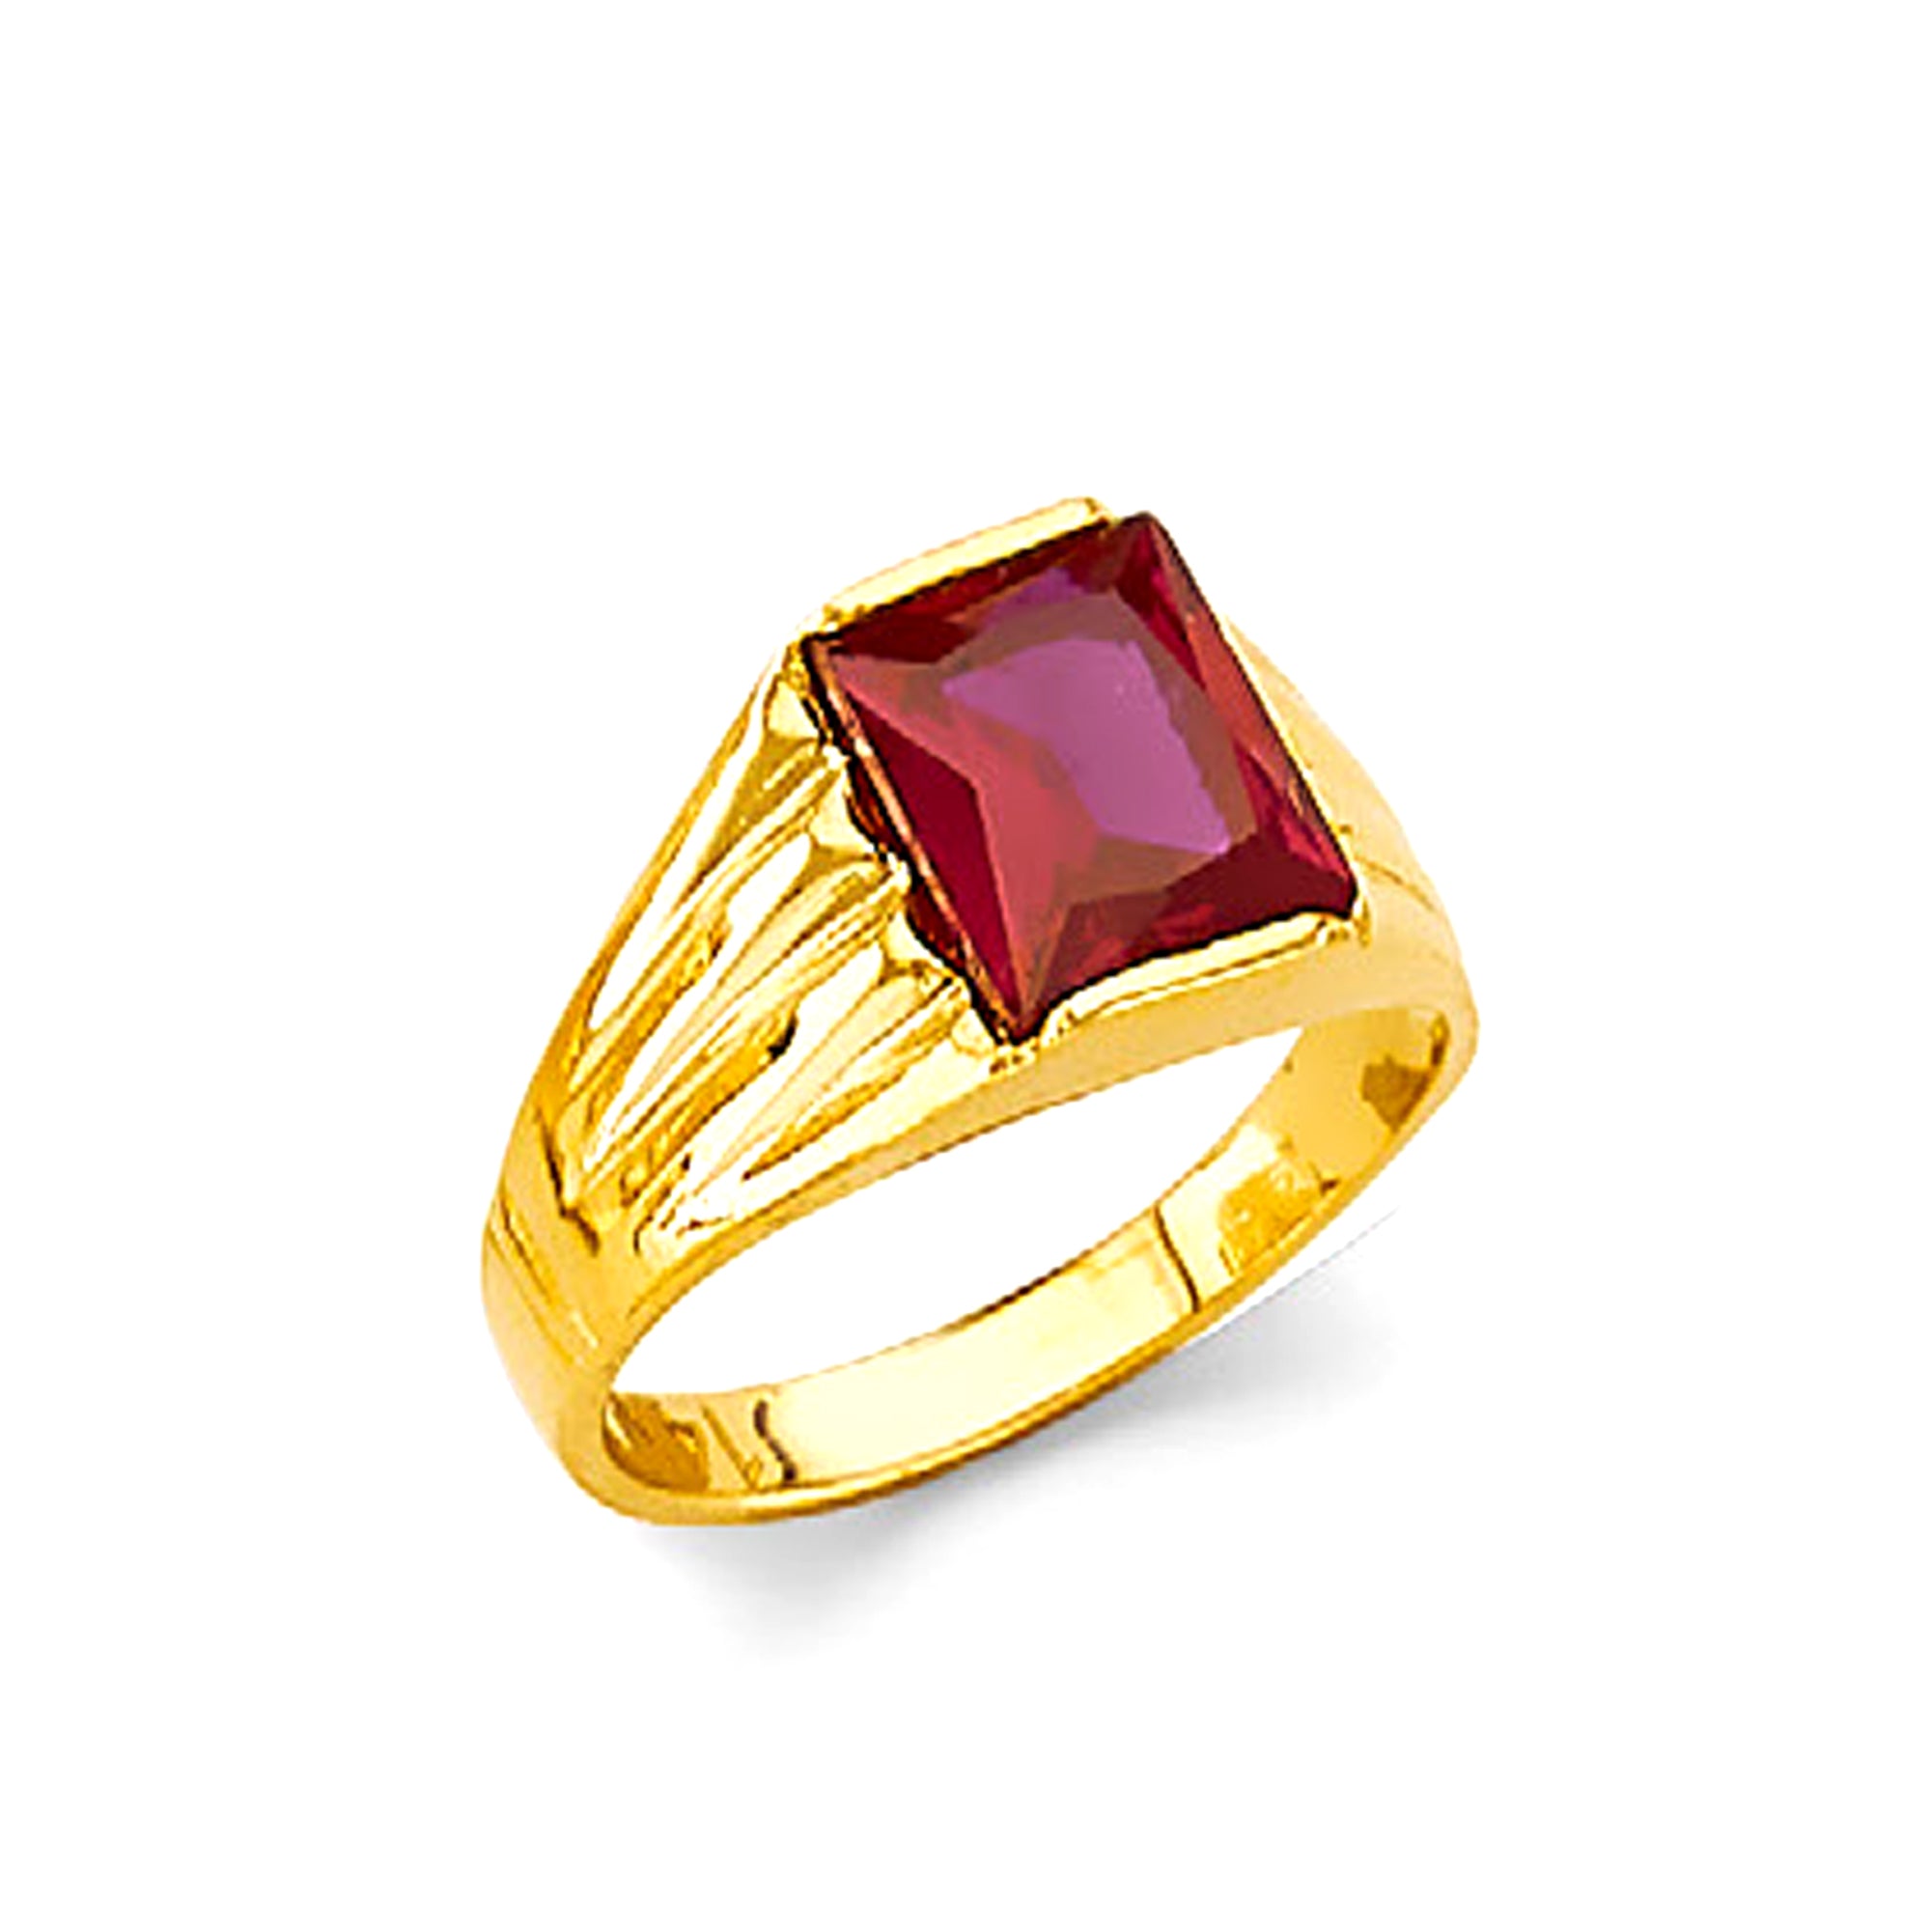 Textured Ruby Gemstone Ring in Solid Gold 